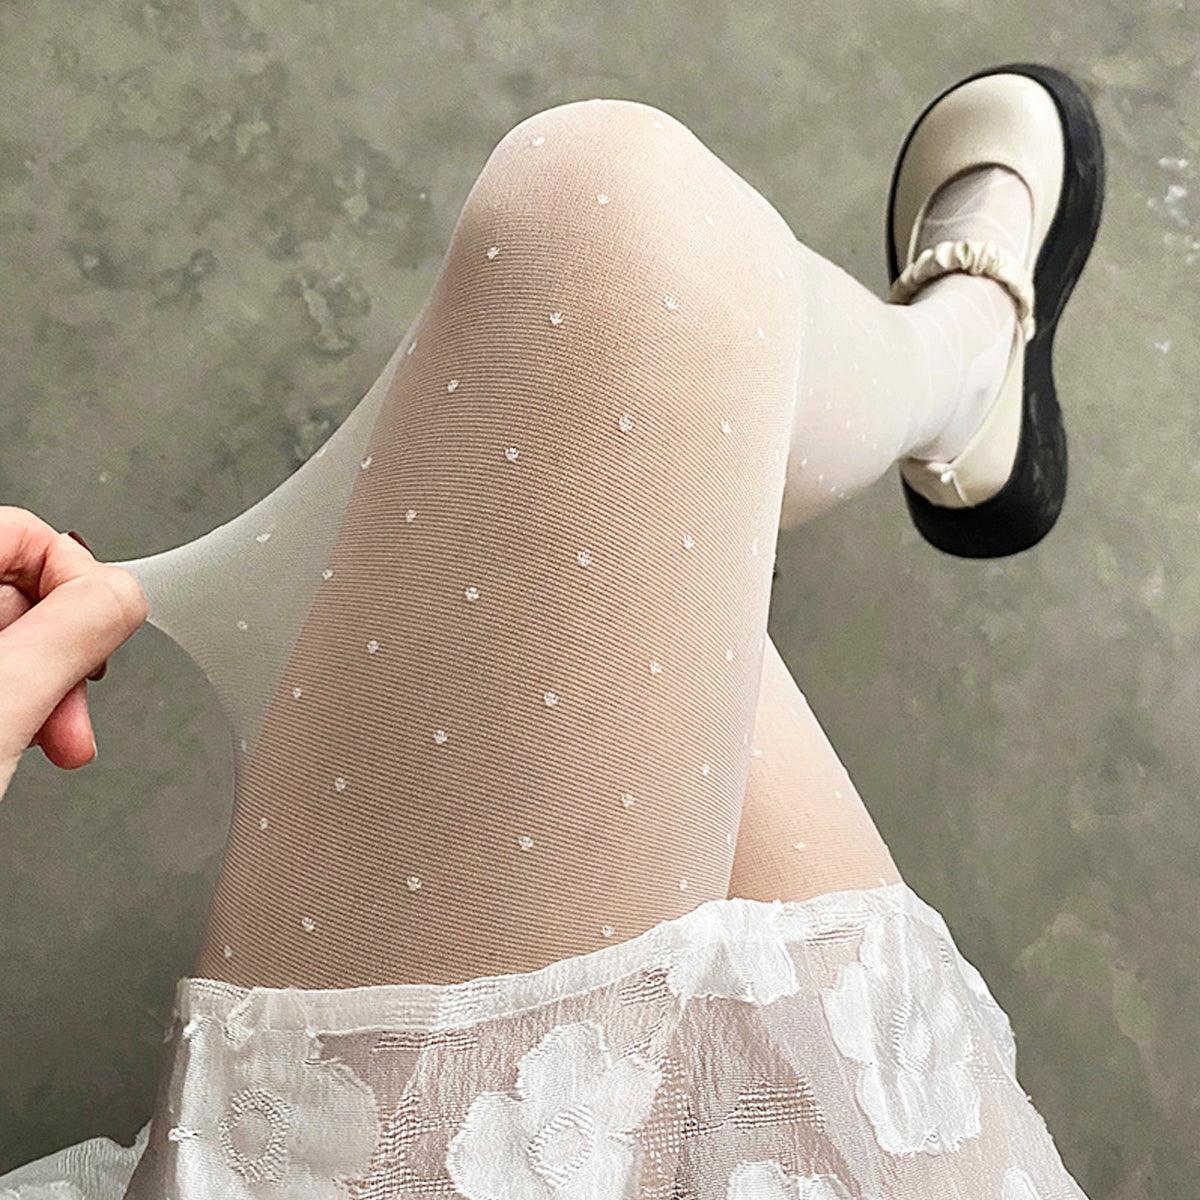 Ankle Laced White Polka Dot Tights - Aesthetic Clothes Shop